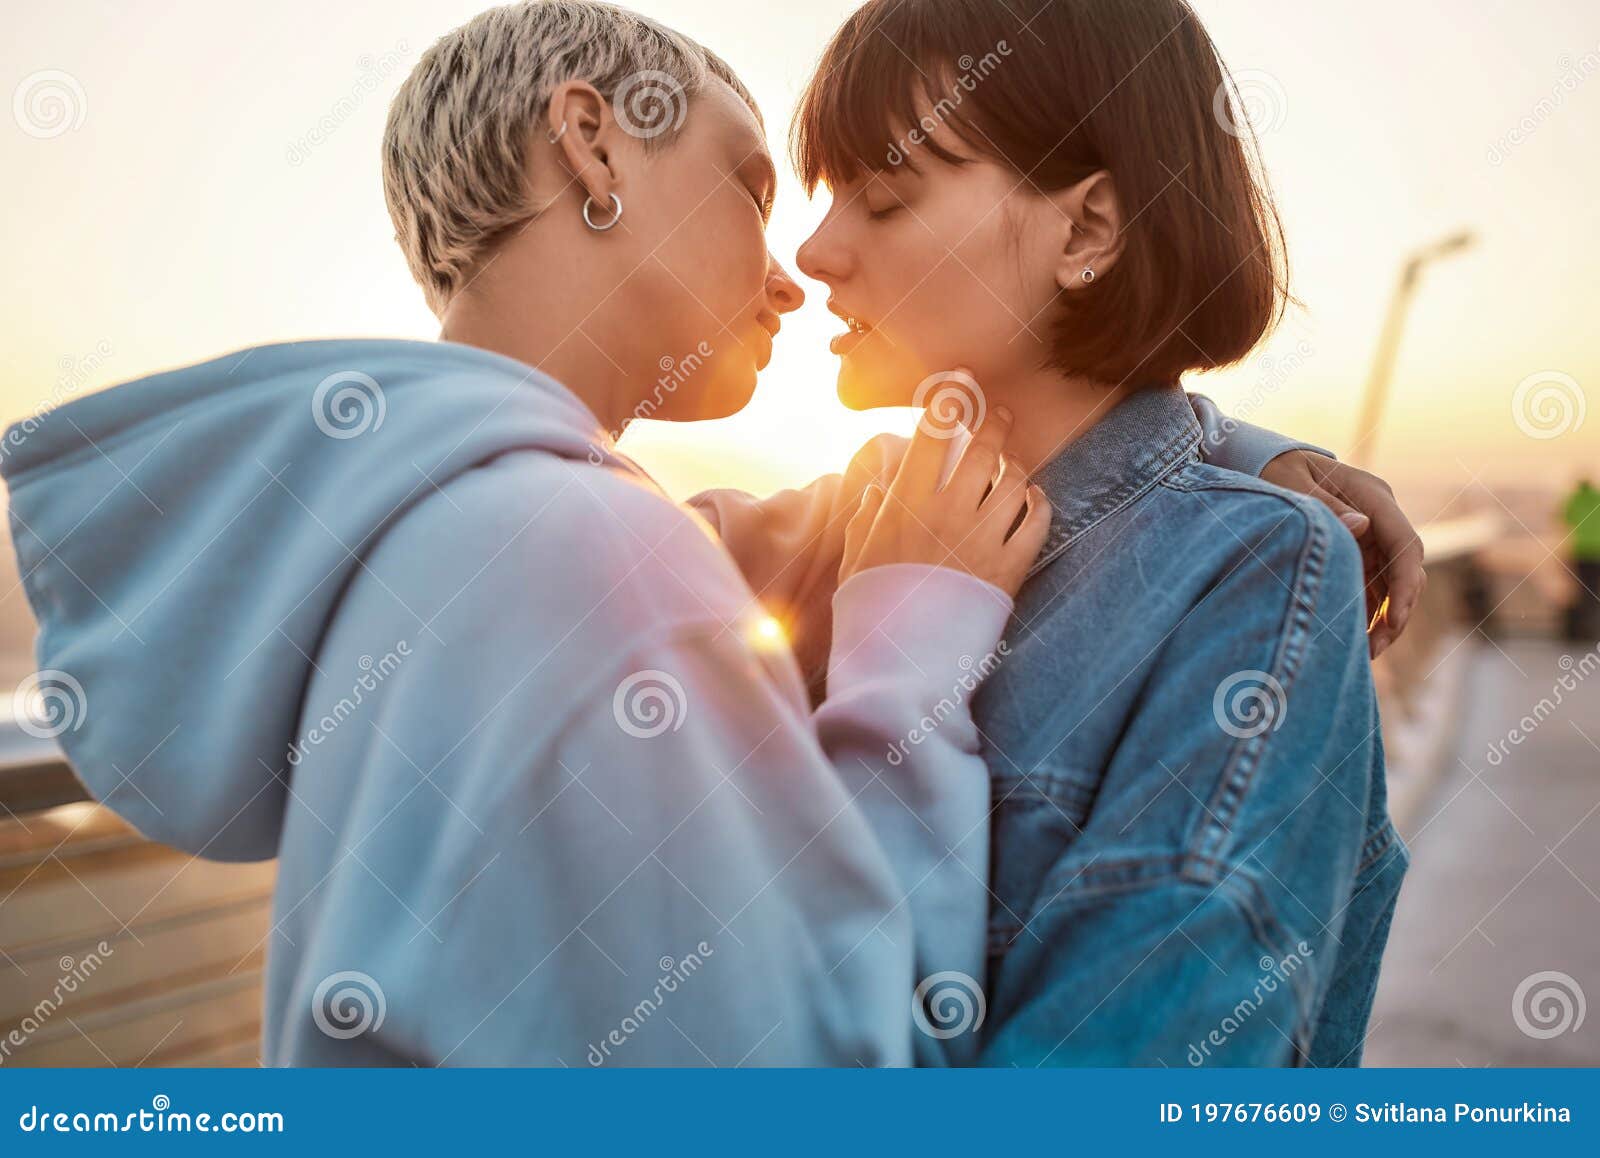 Young Lesbian Couple Having Romantic Moment Two Women Going To Kiss While Watching The Sunrise 